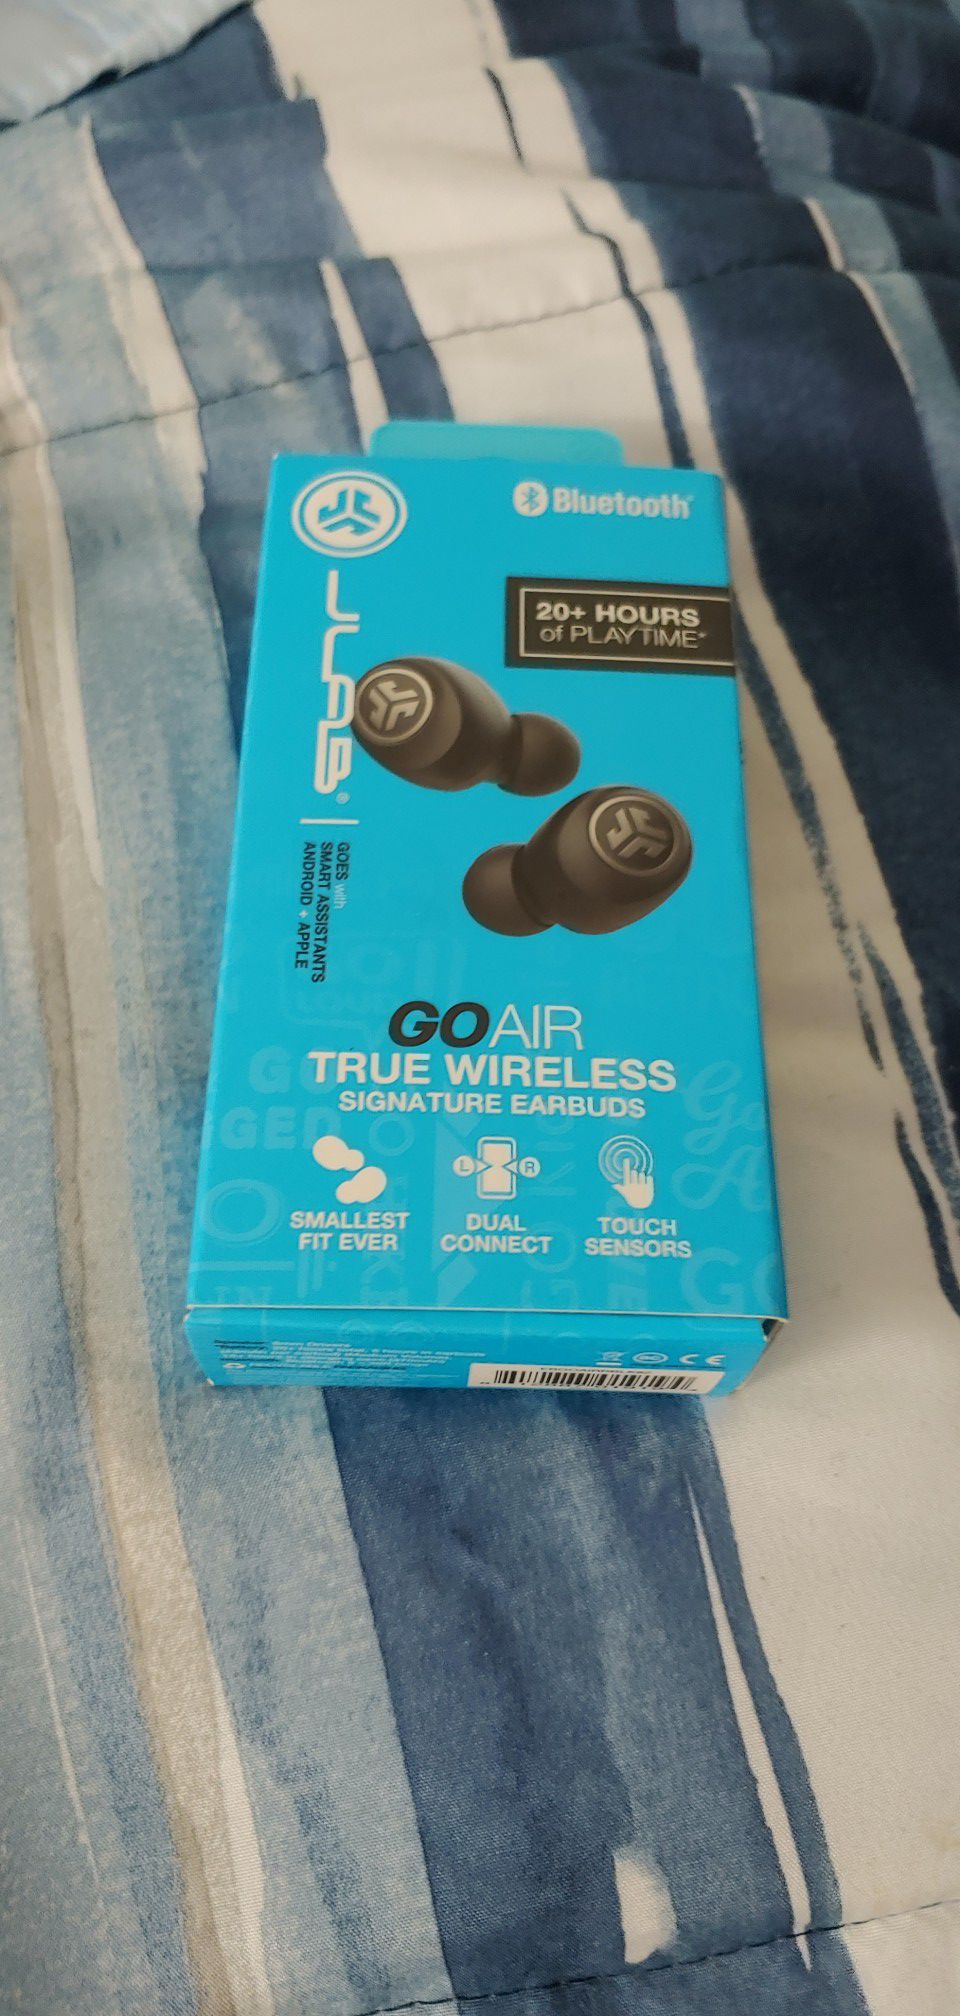 Jlab air go wireless earbuds touch control